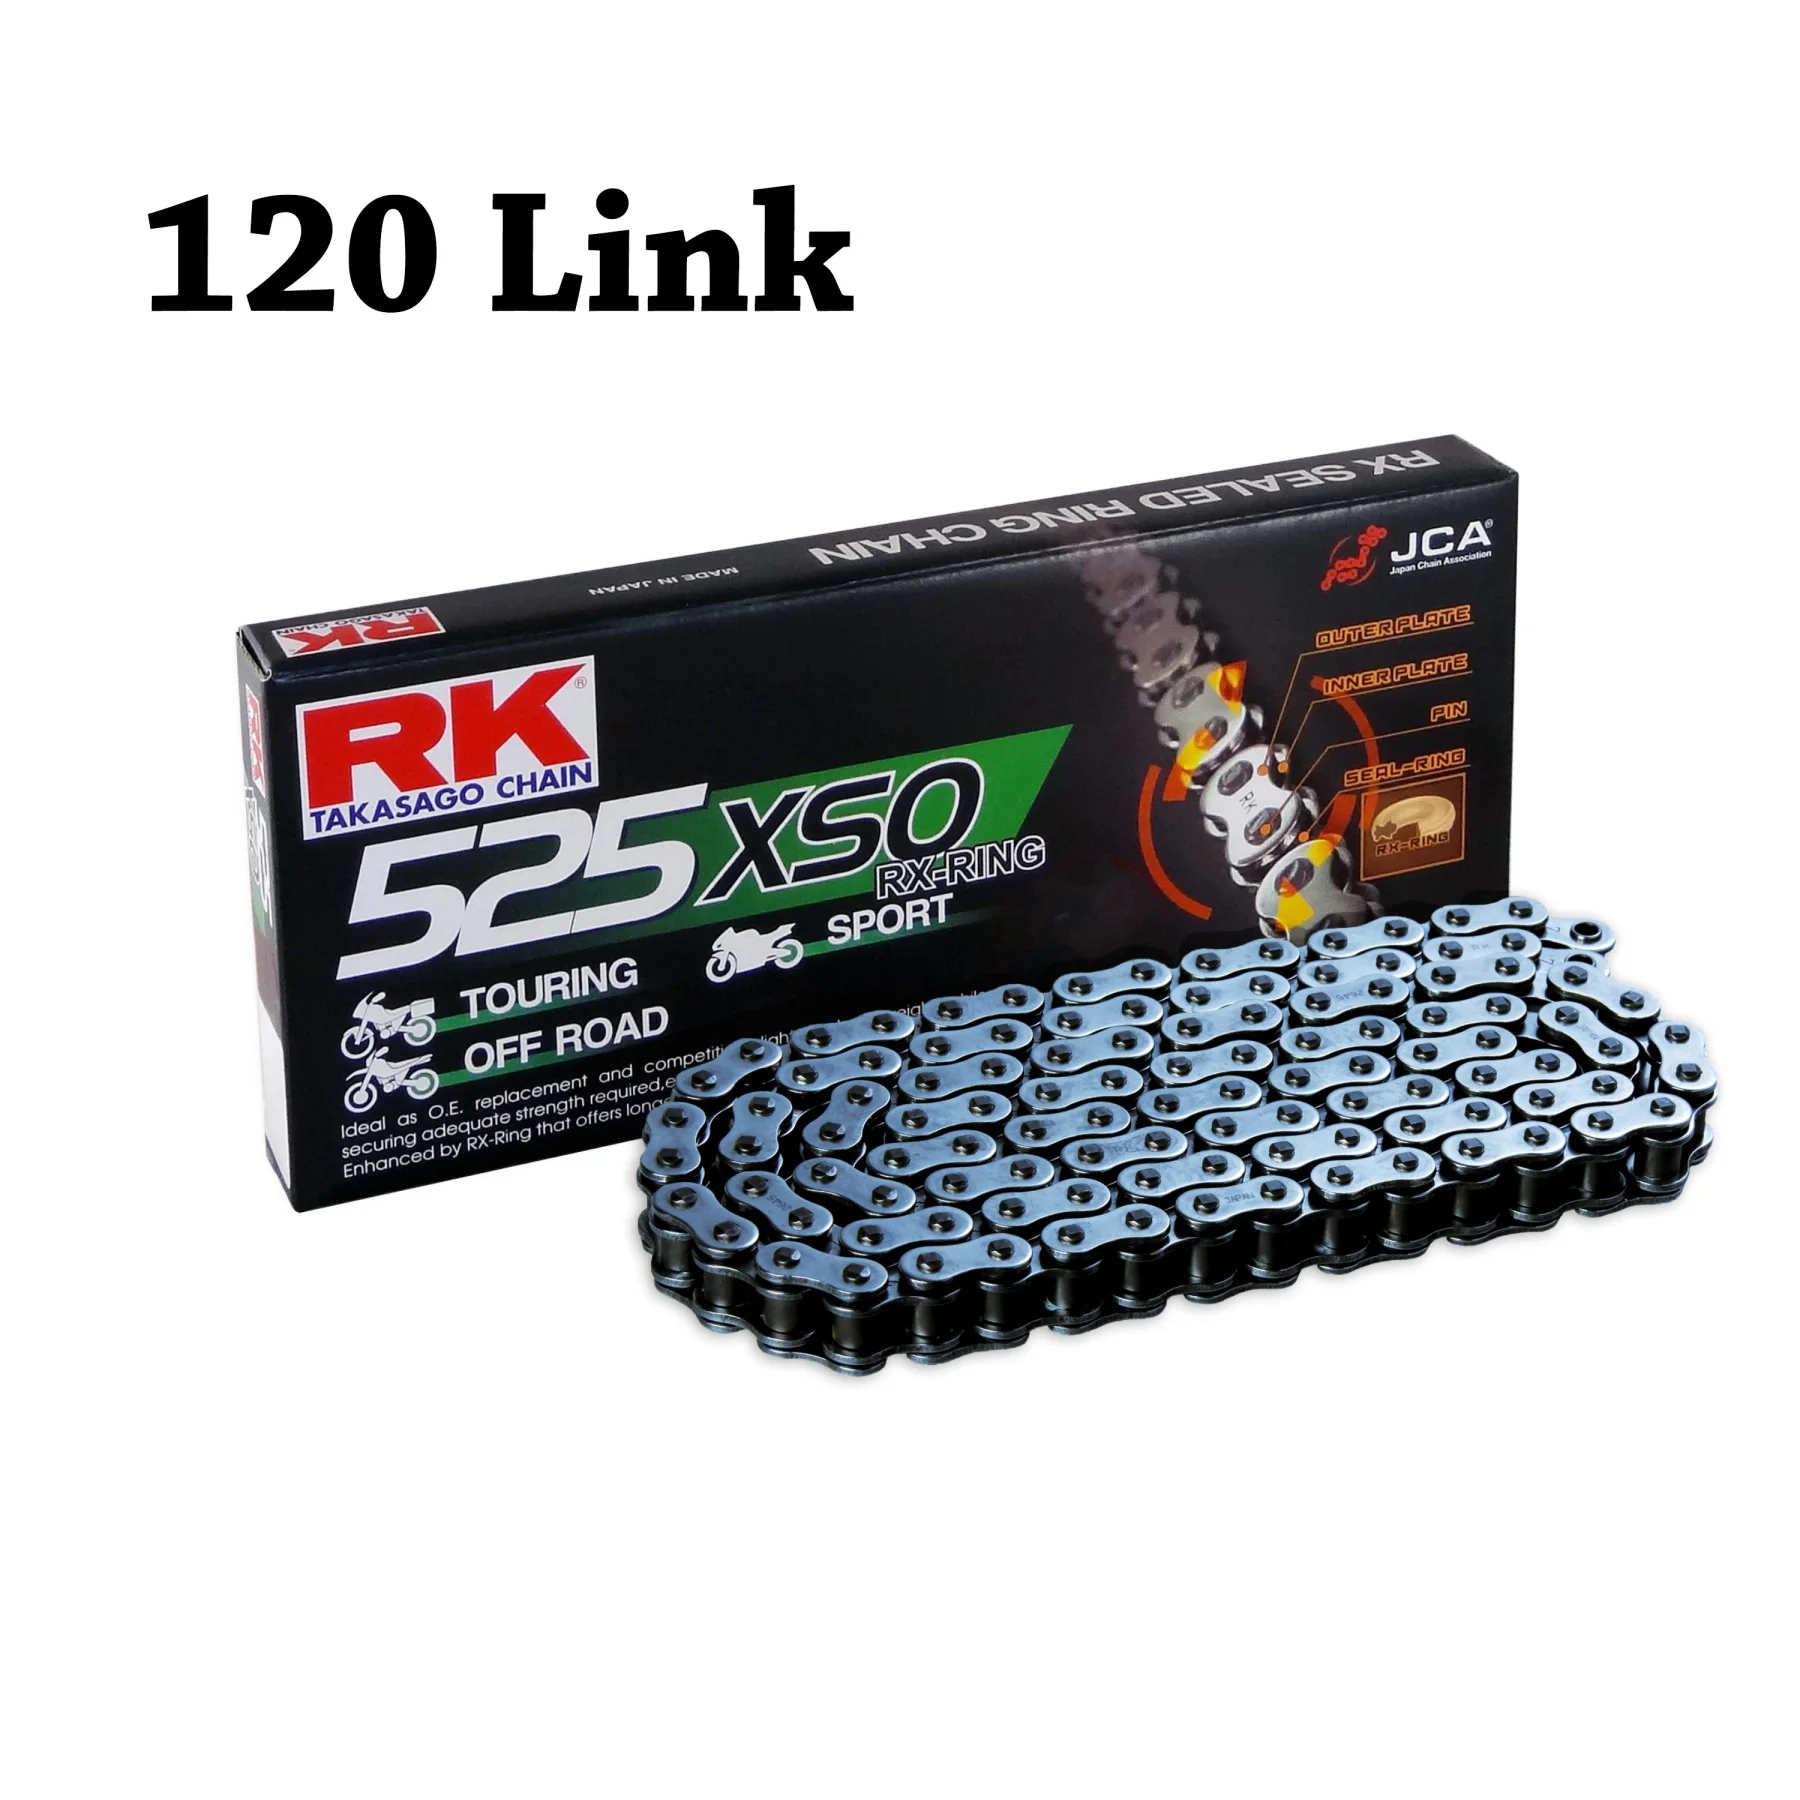 

RK Motorcycle Chain X-Ring 525 XSO 120 L for KTM 125-250-300-400-450-640-990-1190 EXC/SX/Adventure/SC/SMX/SXC/Duke/MXC/EGS/RC8